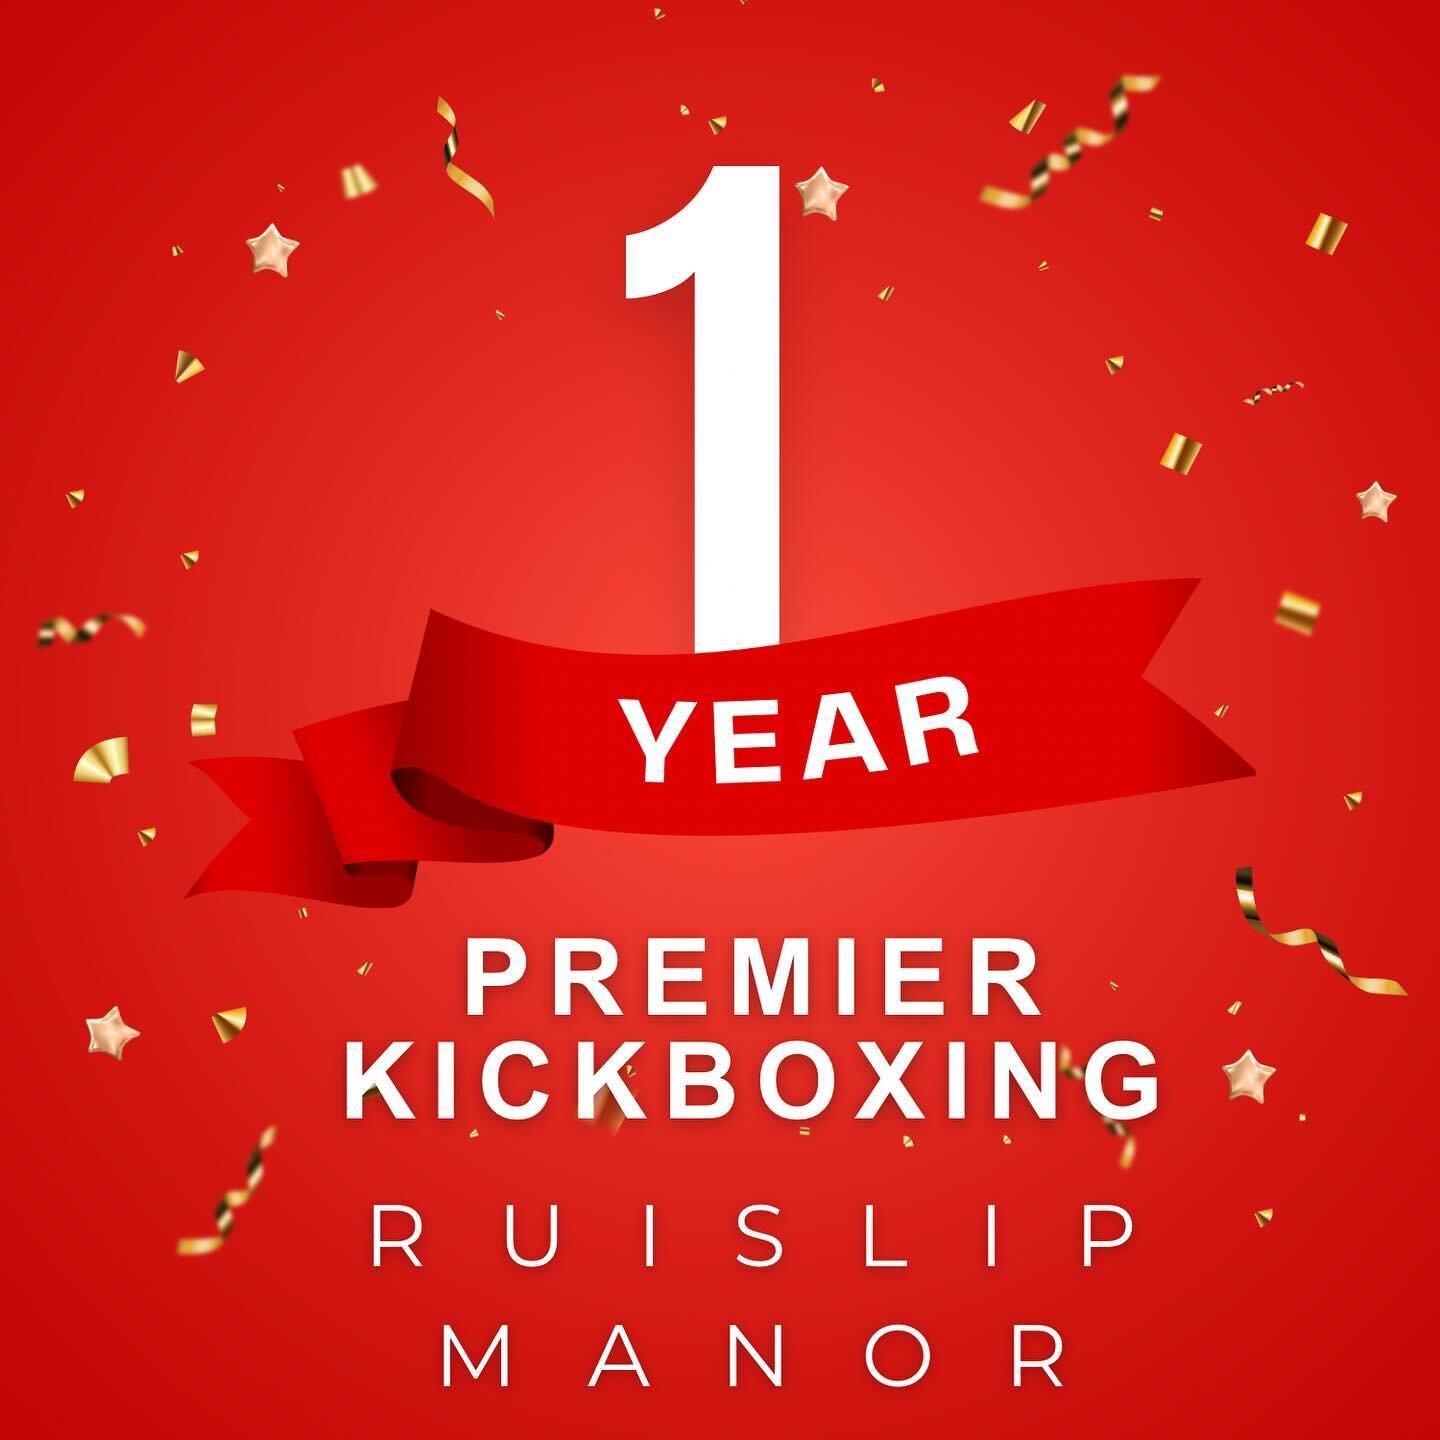 Premier Ruislip Manor is one year old. We&rsquo;ve had a fantastic year meeting some incredible new members. We&rsquo;re nearly at 350 students already. Thank you to the whole team @tomgolding8 @j4ckb1nd1ng @hollyforanx @chloewhelan._ @_alex.lewis_ i